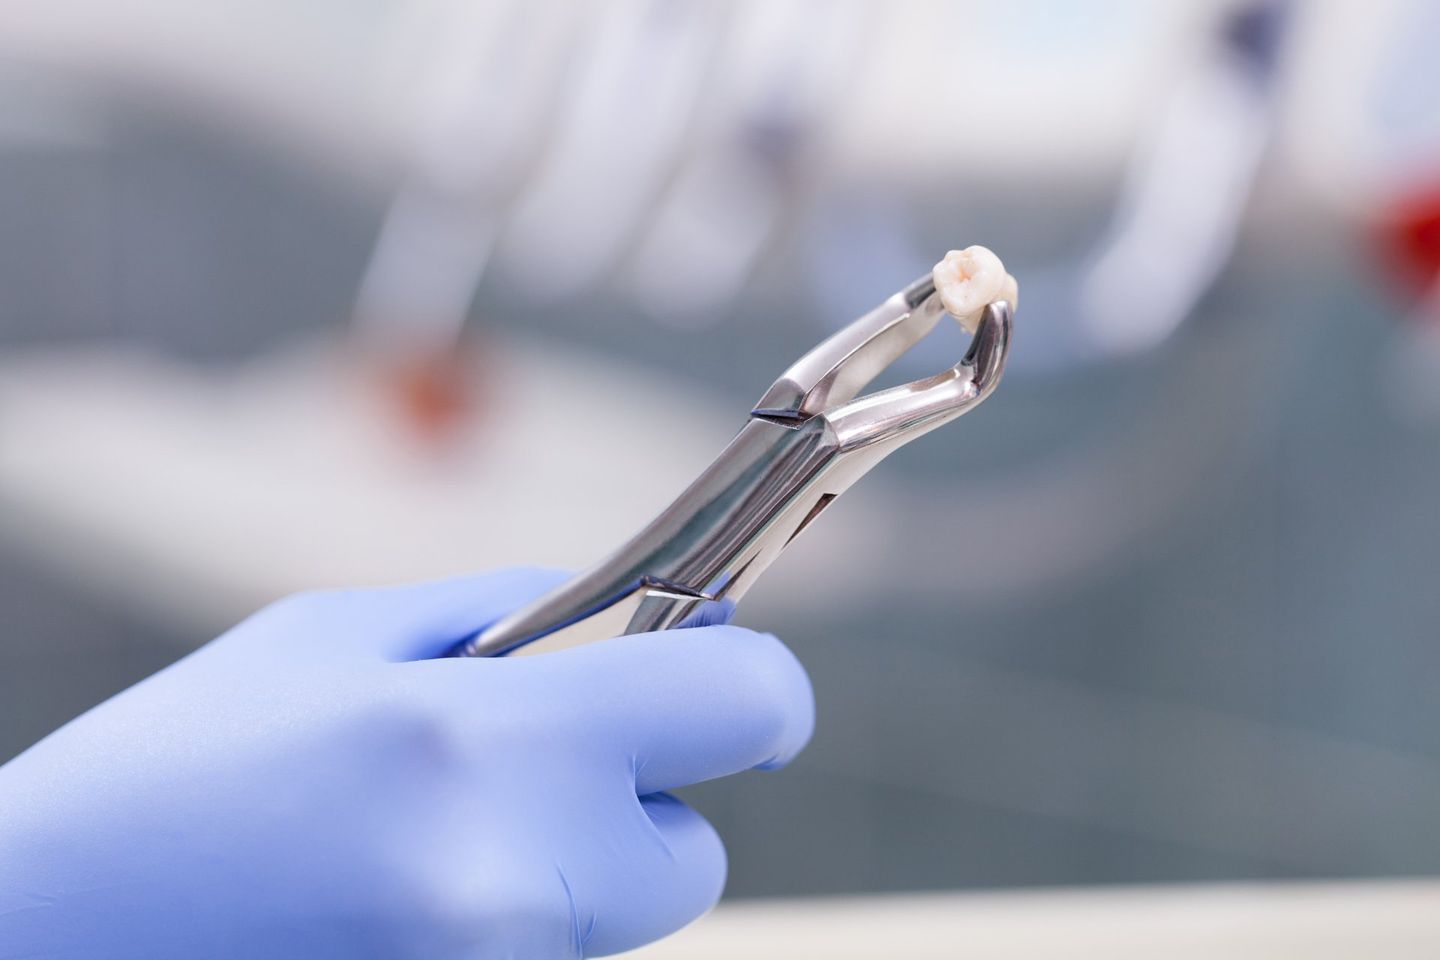 Dental Instrument For Tooth Extraction - Dental Treatments in Port Macquarie, NSW